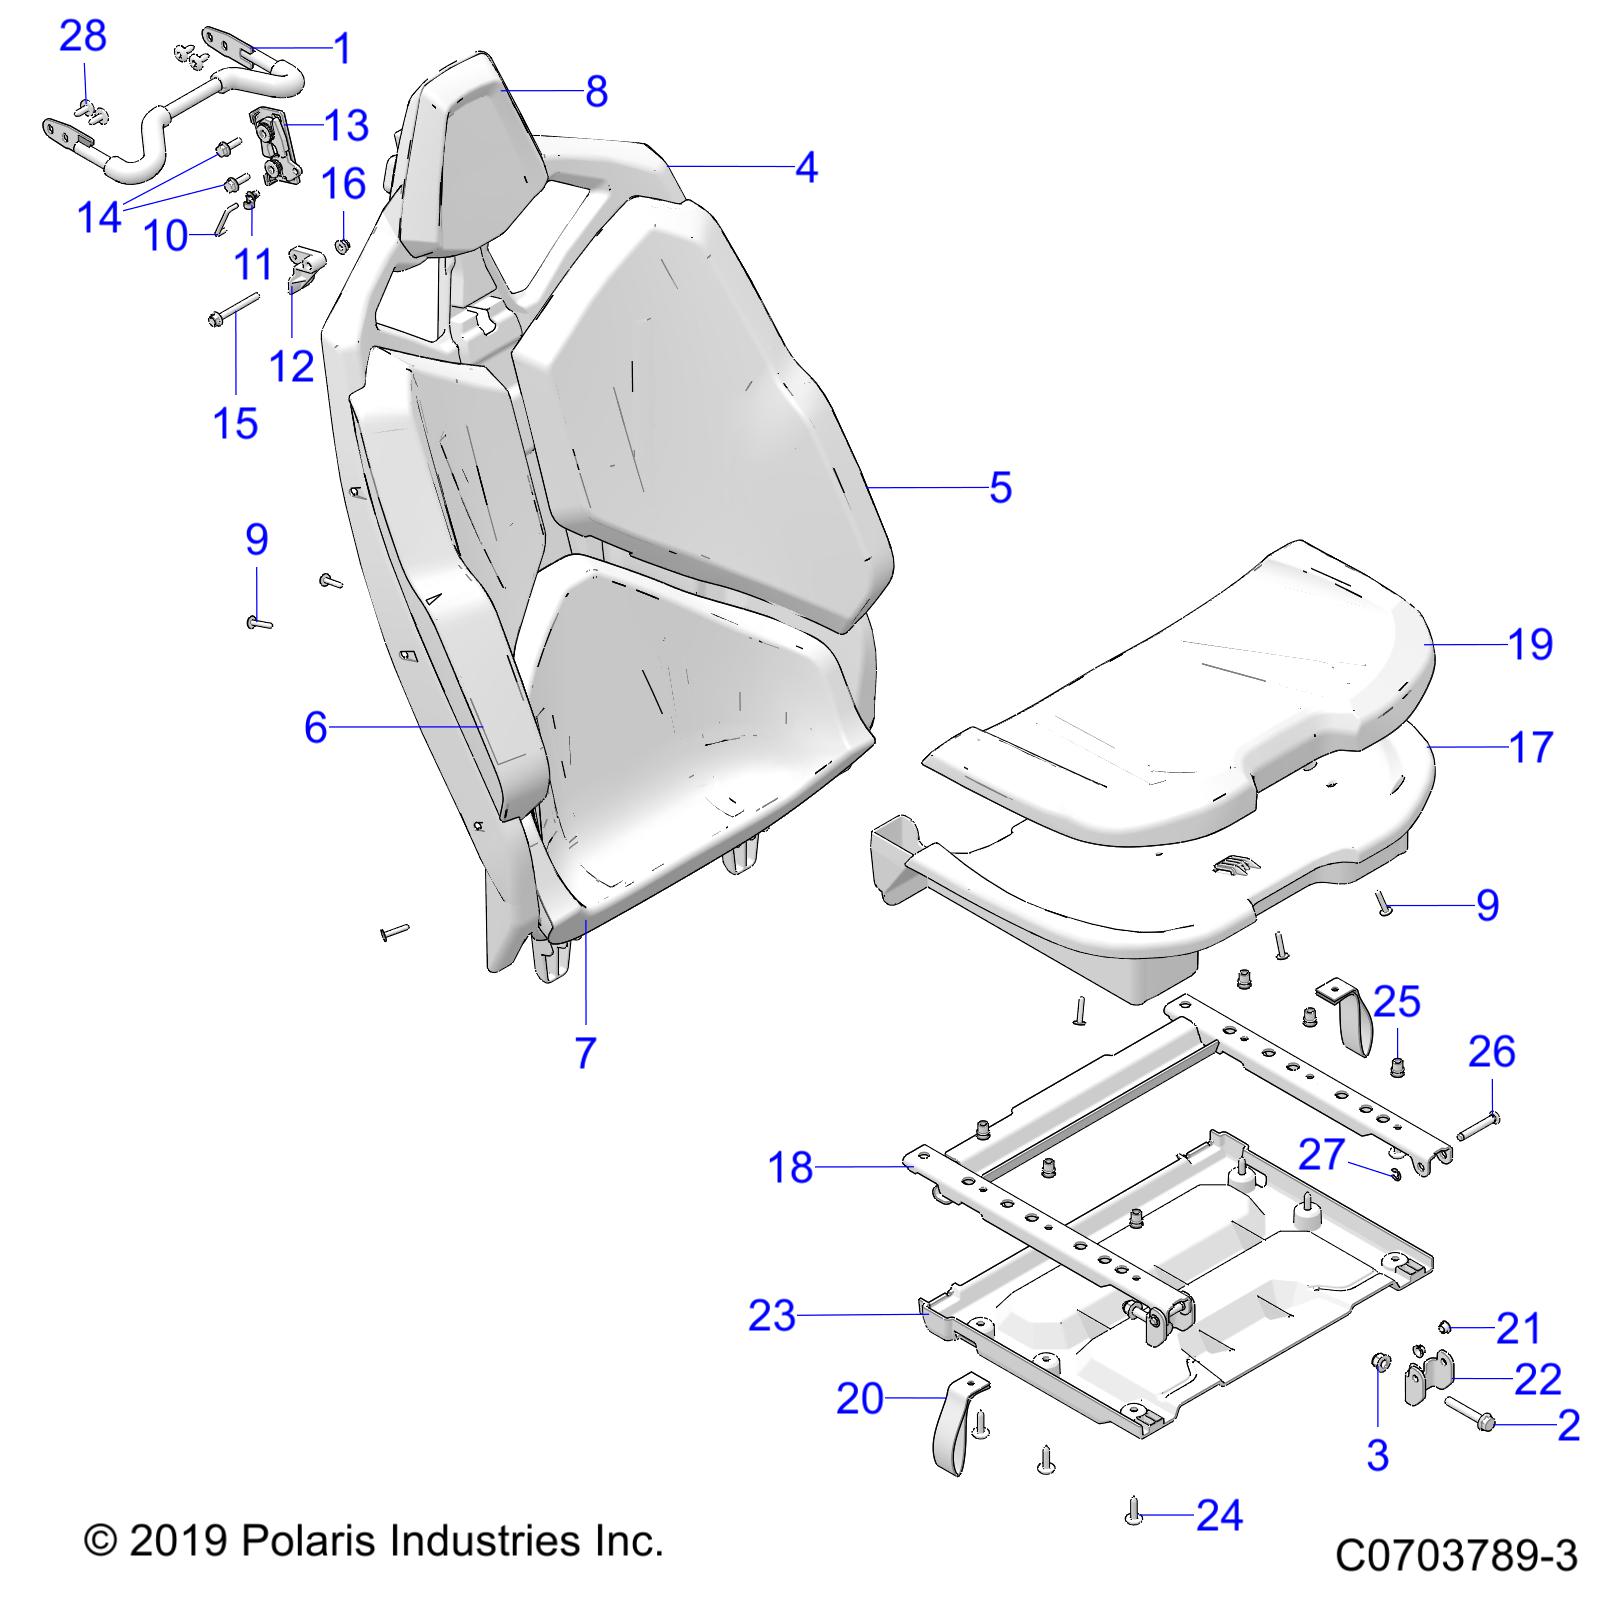 Part Number : 2692128 ASM-SEAT BOTTOM BLK/IRED WHT S